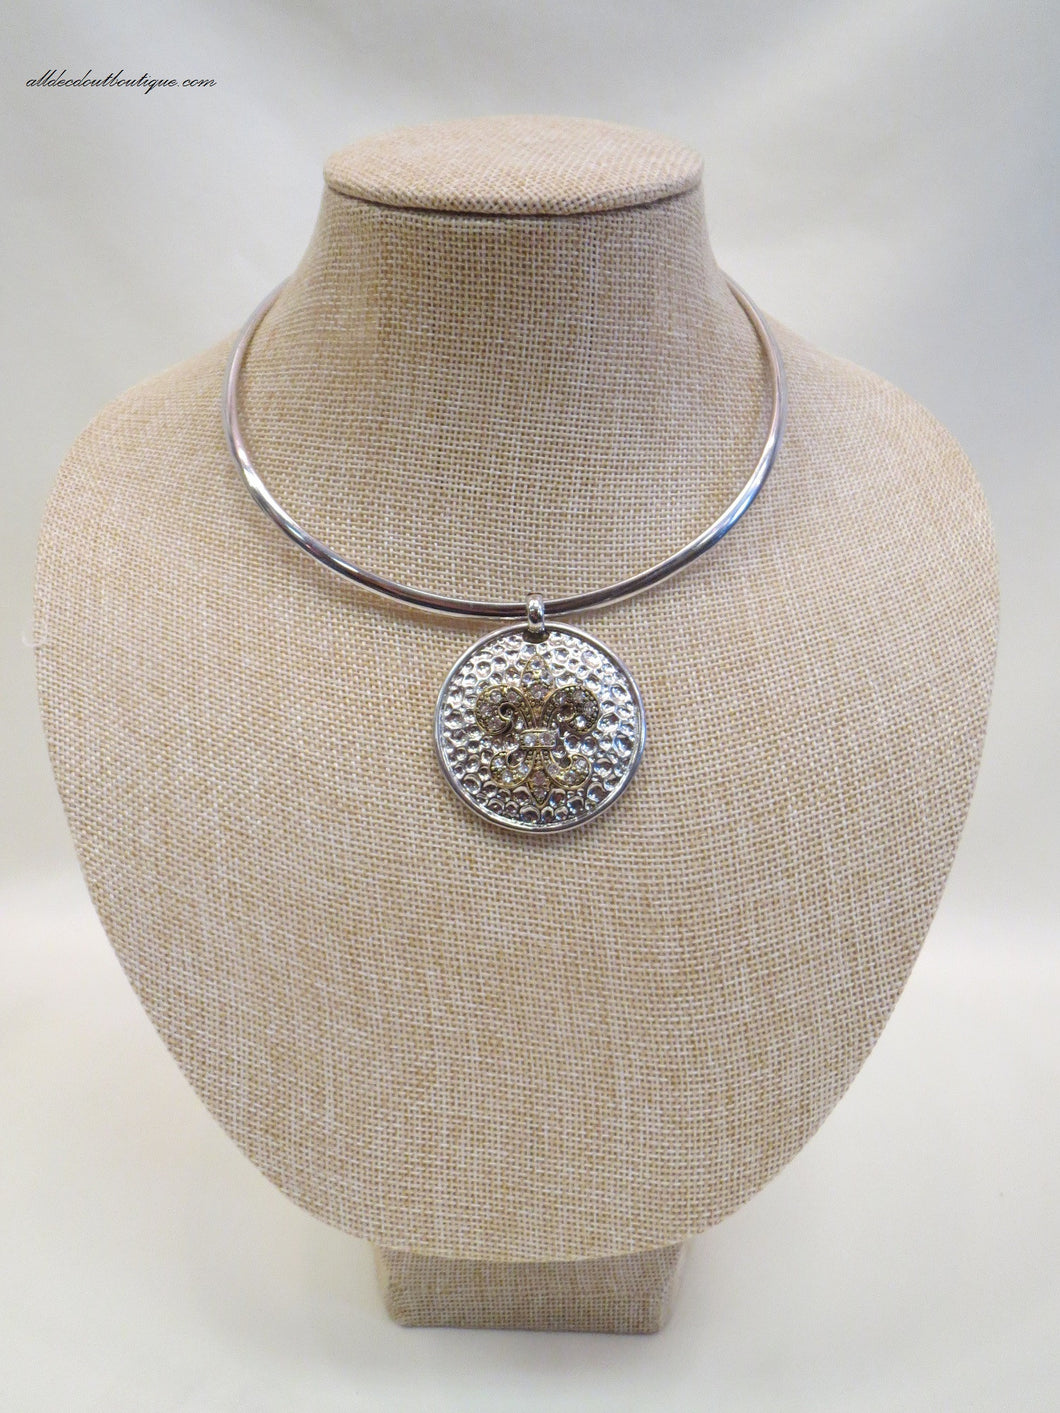 ADO | Silver Choker Necklace with Embellished Fleur De Lis - All Decd Out